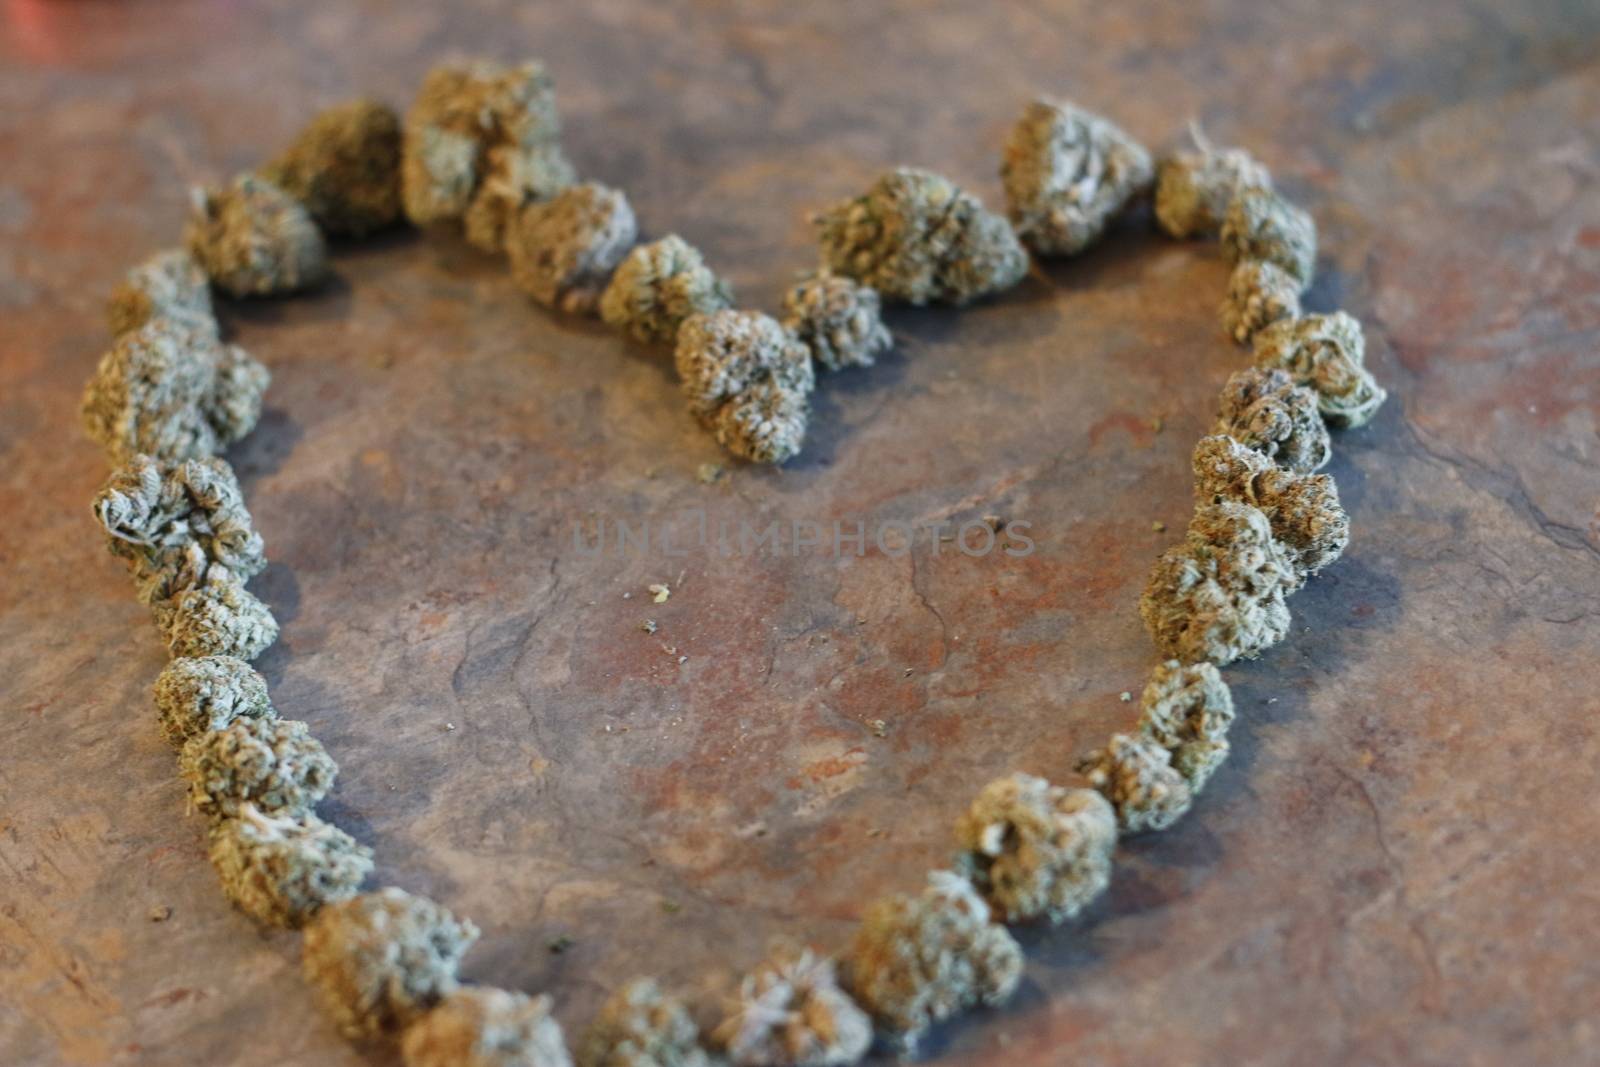 The shape of a heart made out of cannabis buds .